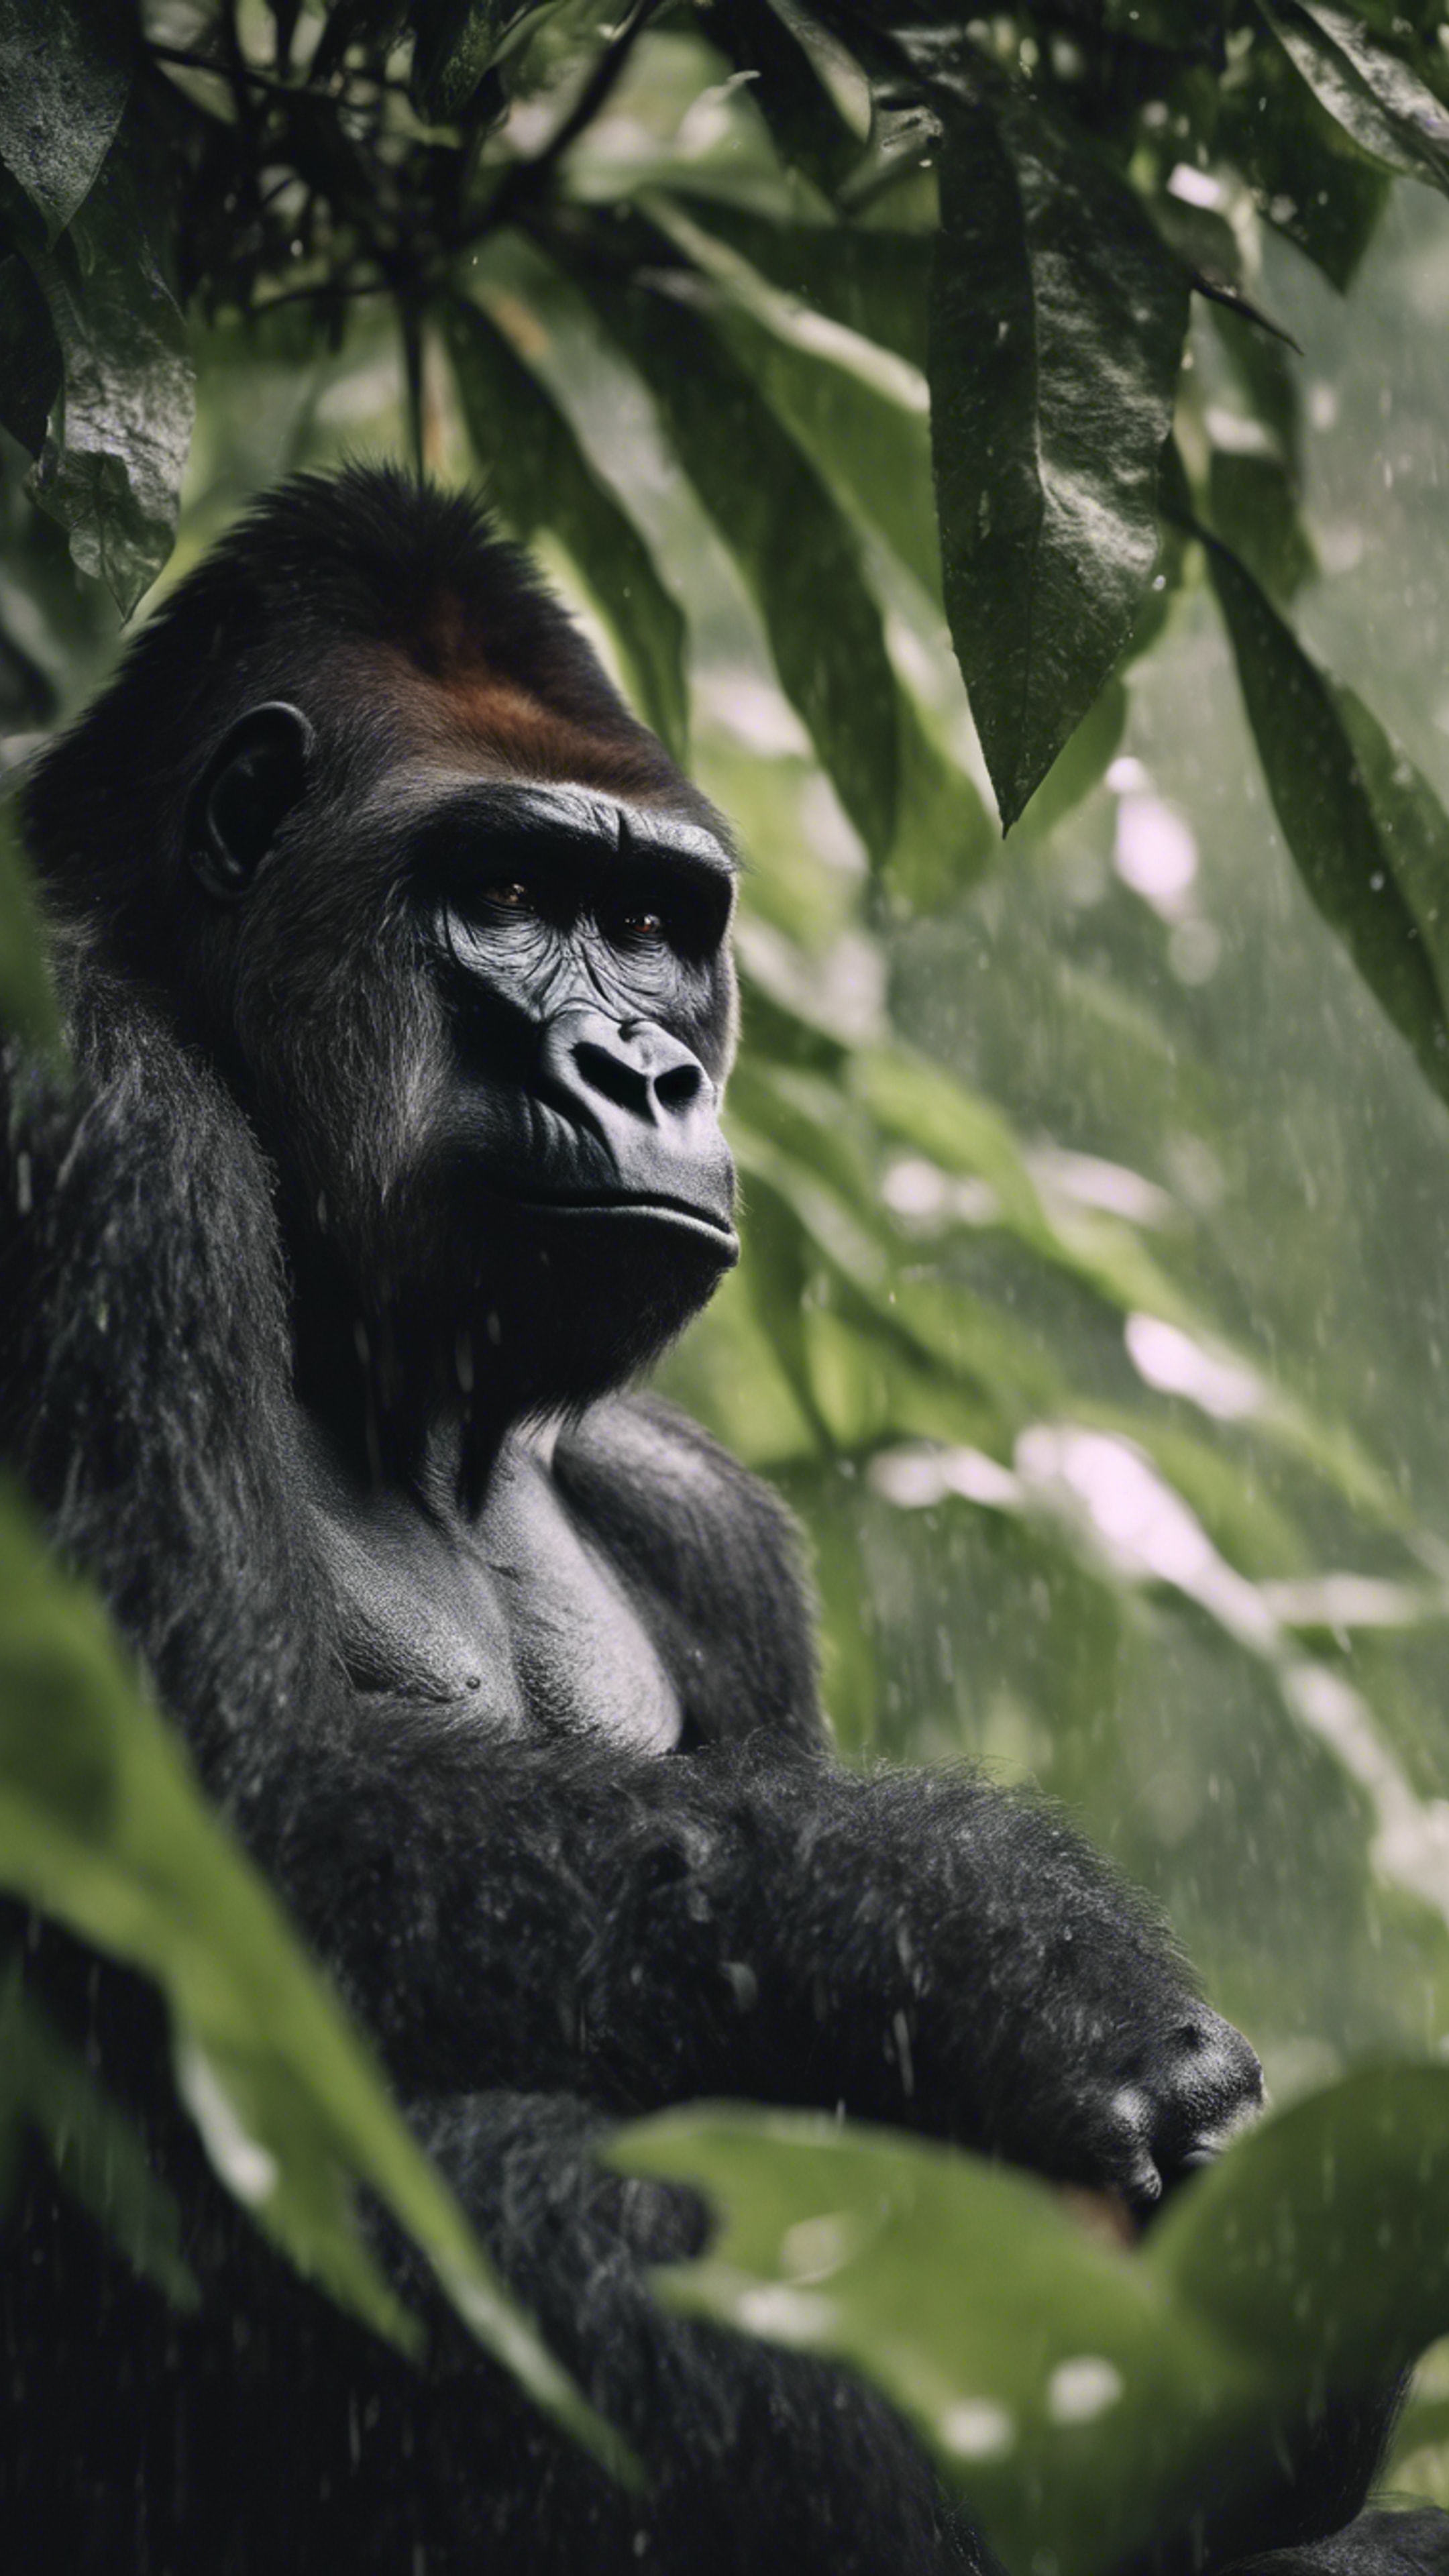 A sad gorilla on a rainy day, gazing out from under the shelter of giant leaves. Sfondo[ce7c66a51f504b8e8f6d]